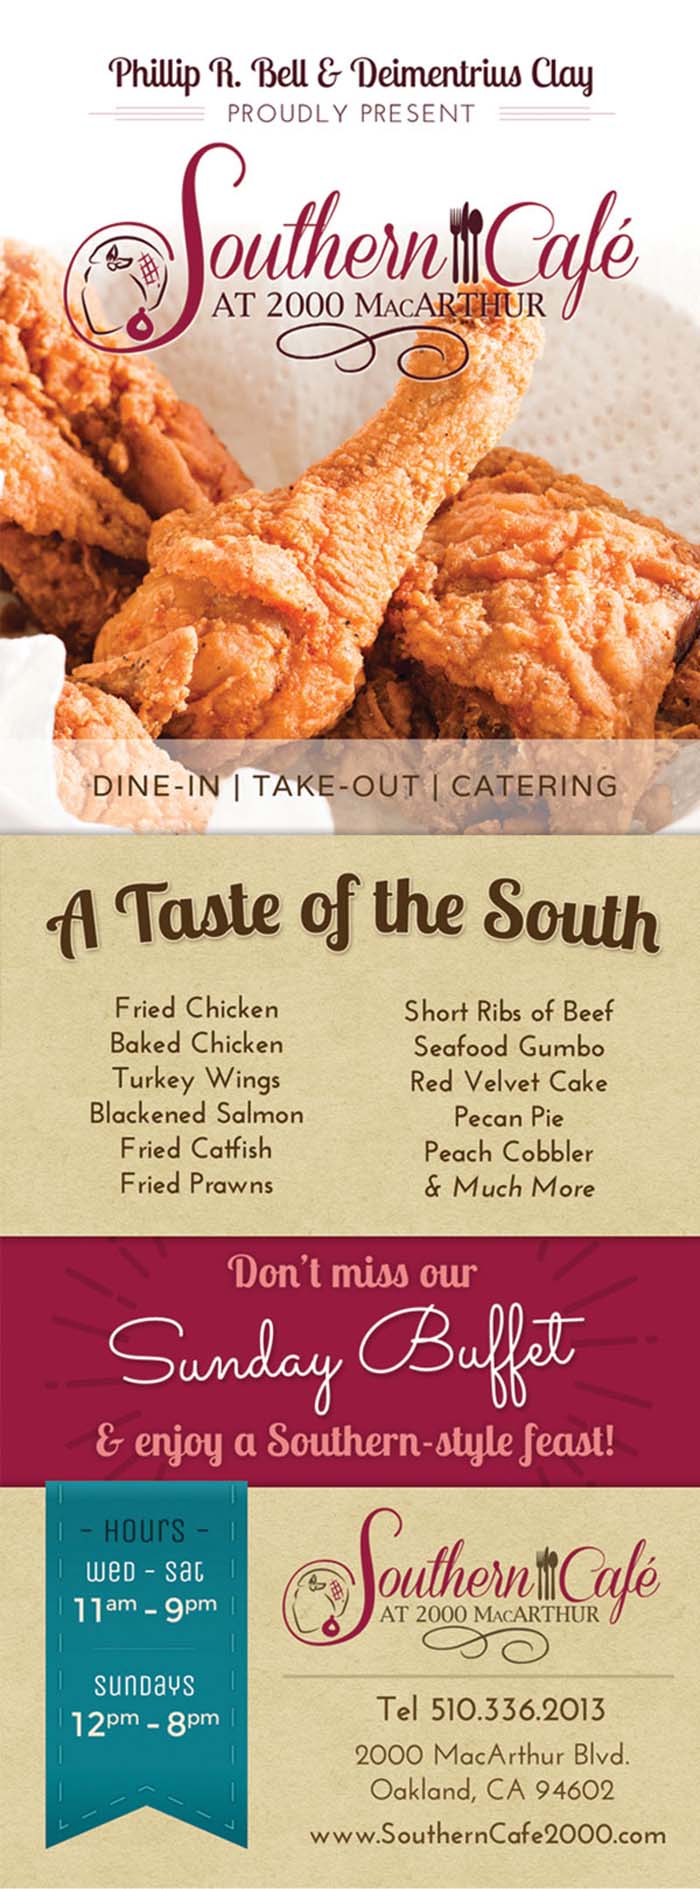 Southern Cafe at 200 MacArthur - A Taste of the South